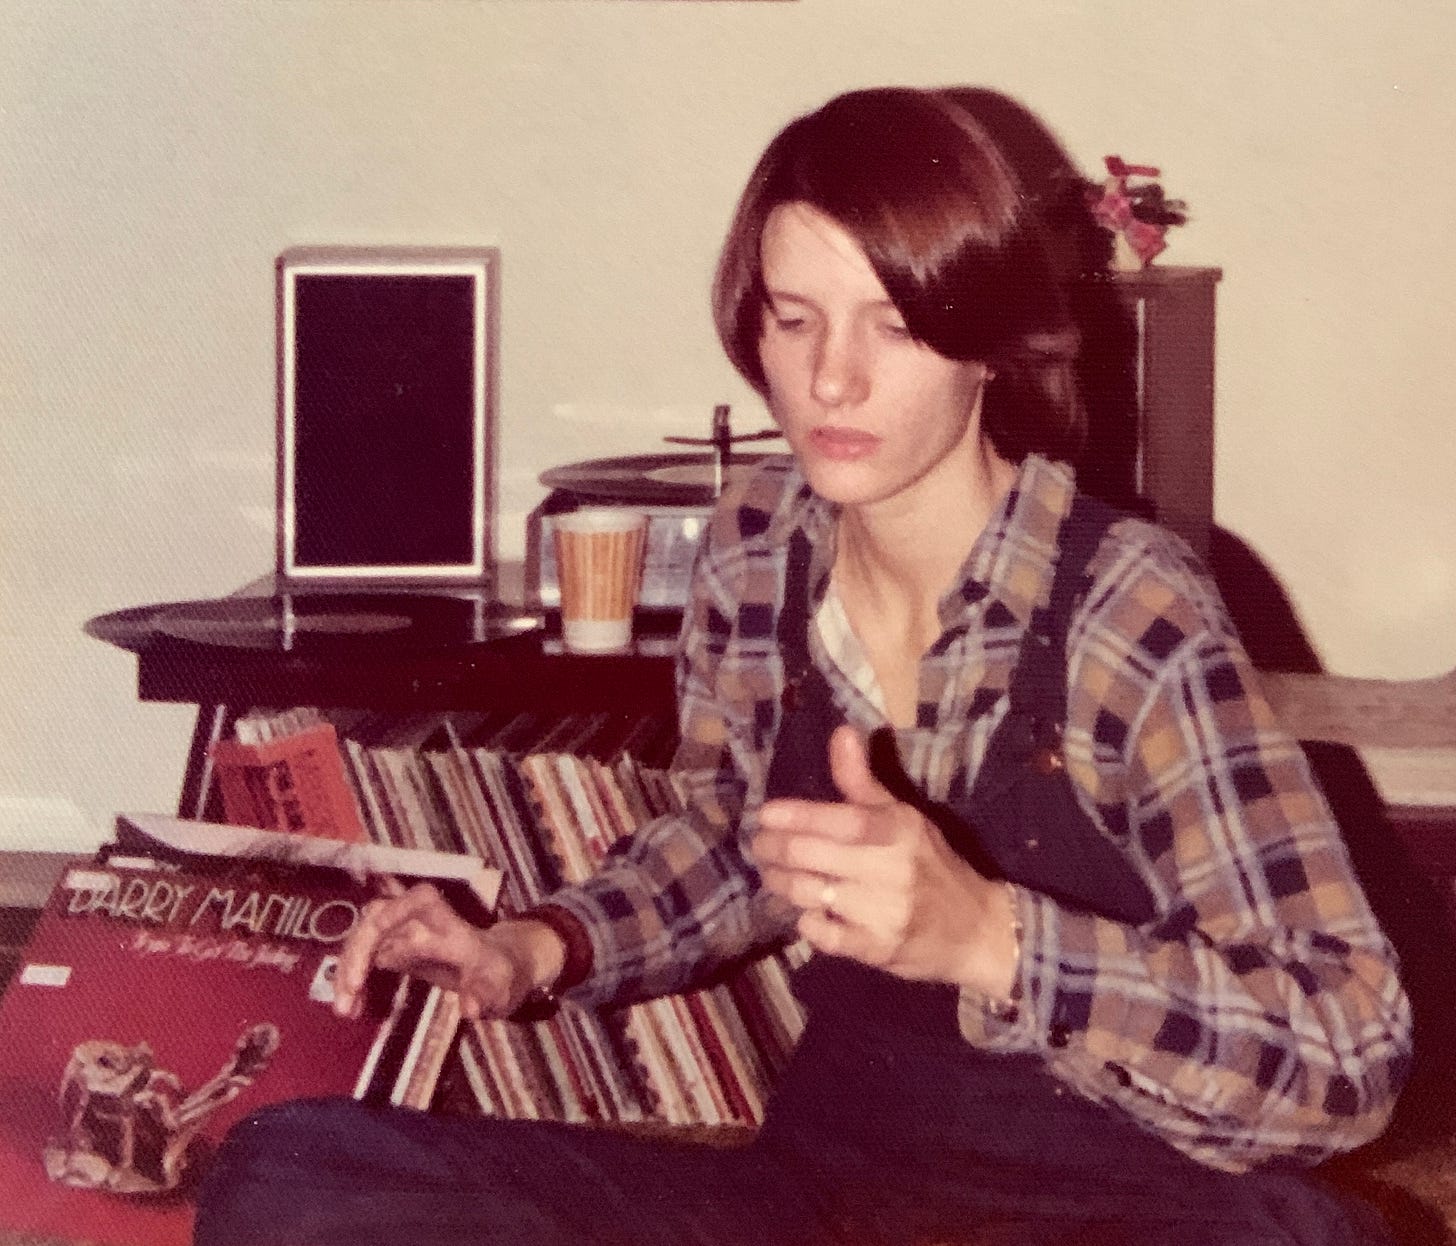 A young woman in a flannel shirt and overalls with record albums all around her